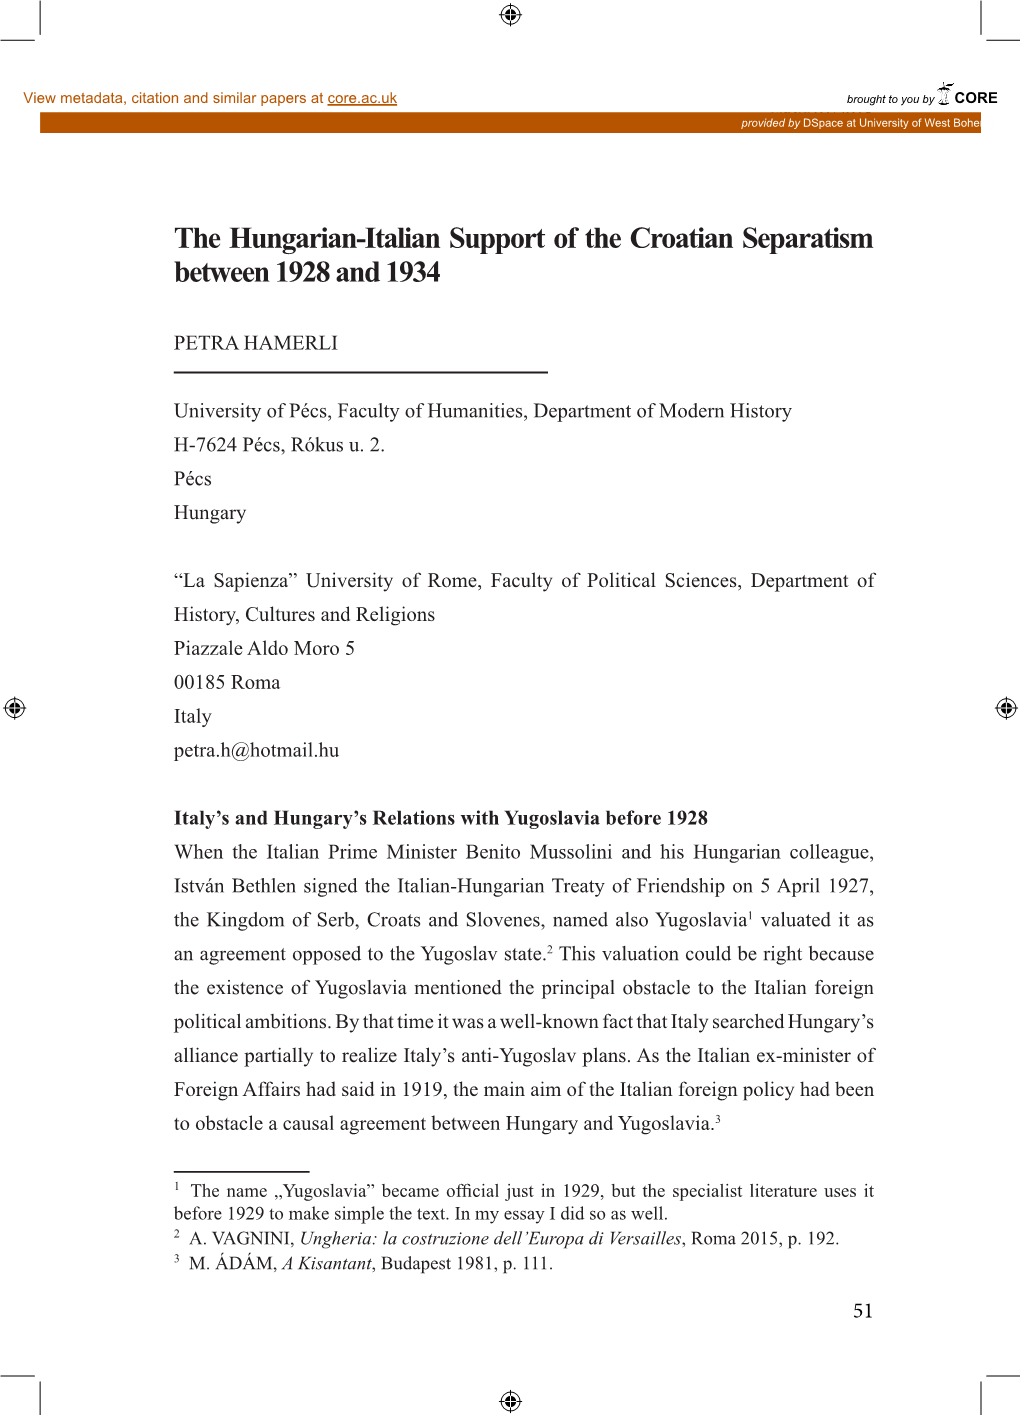 The Hungarian-Italian Support of the Croatian Separatism Between 1928 and 1934